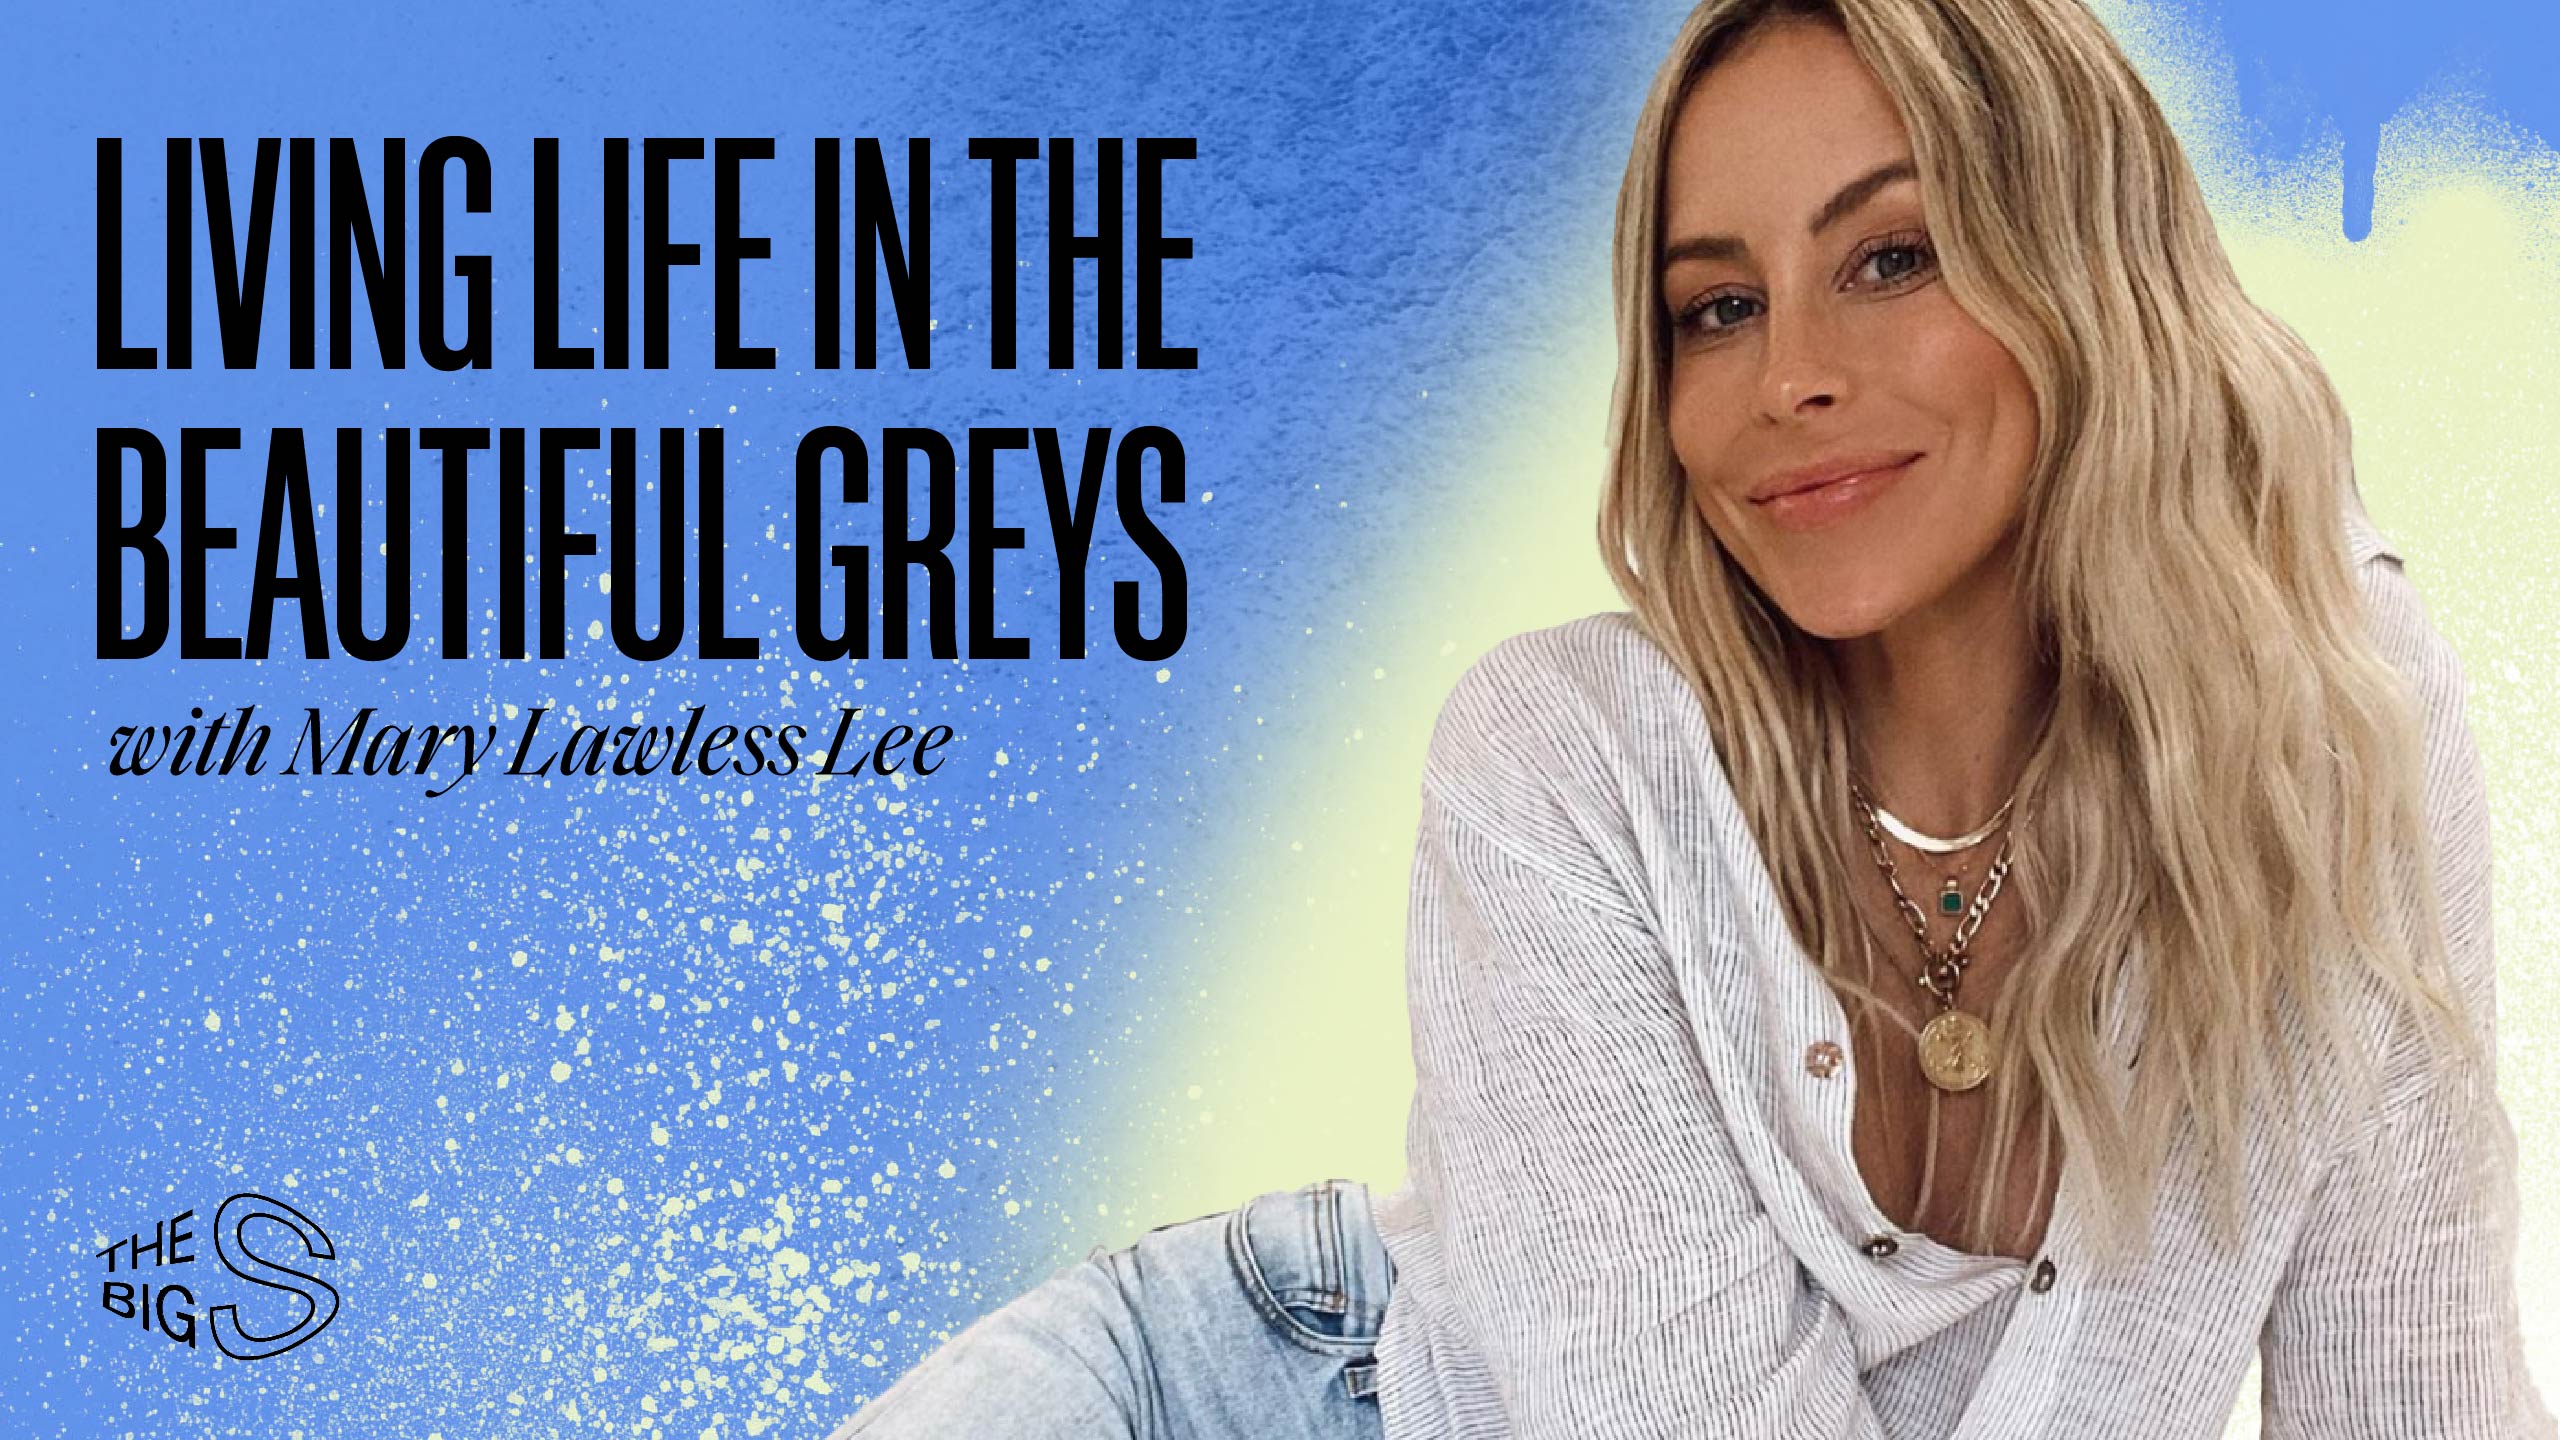 37. Living Life in the Beautiful Greys with Mary Lawless Lee